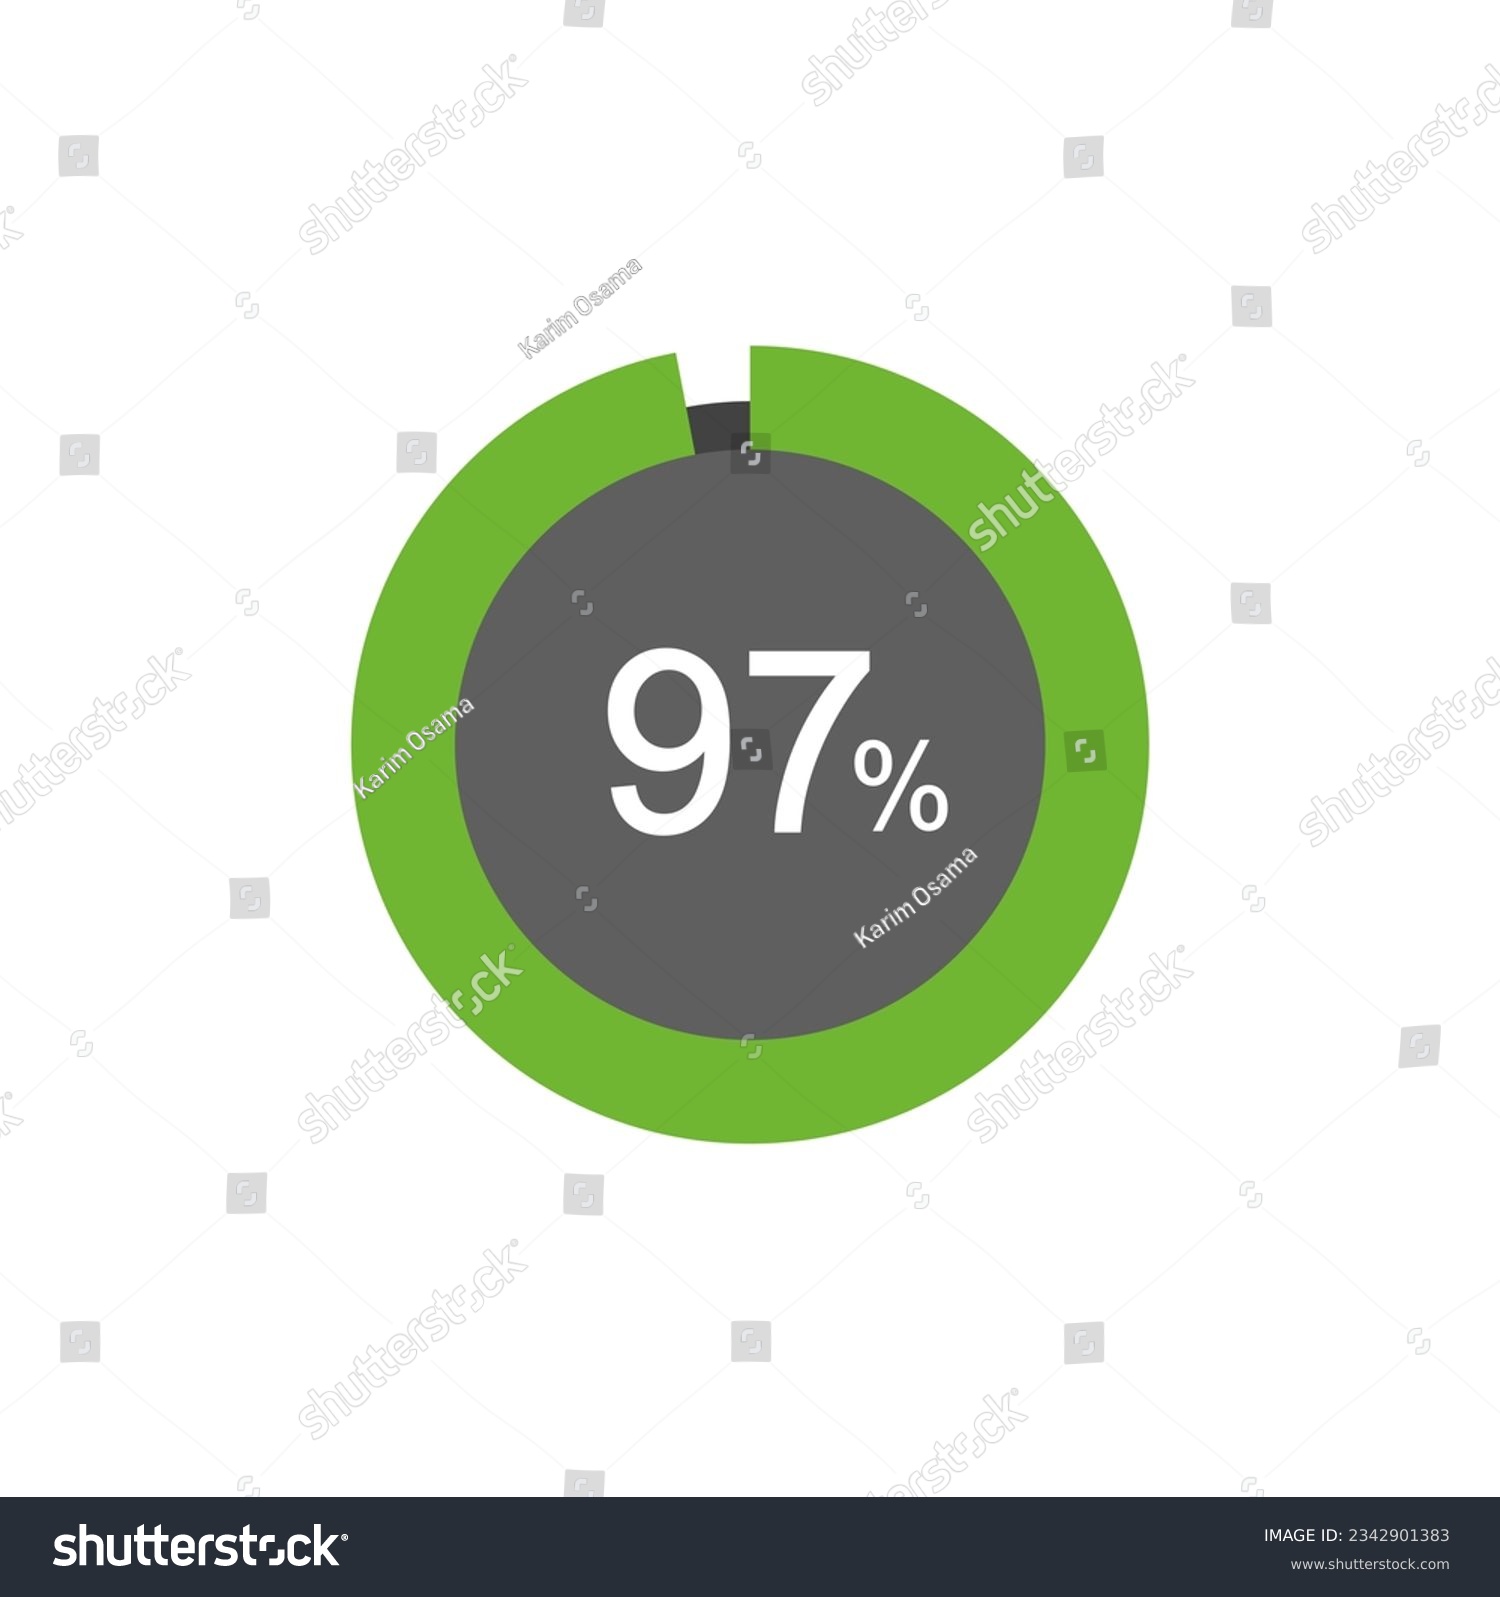 SVG of 97% percentage infographic circle icons, 97 percents pie chart infographic elements. svg